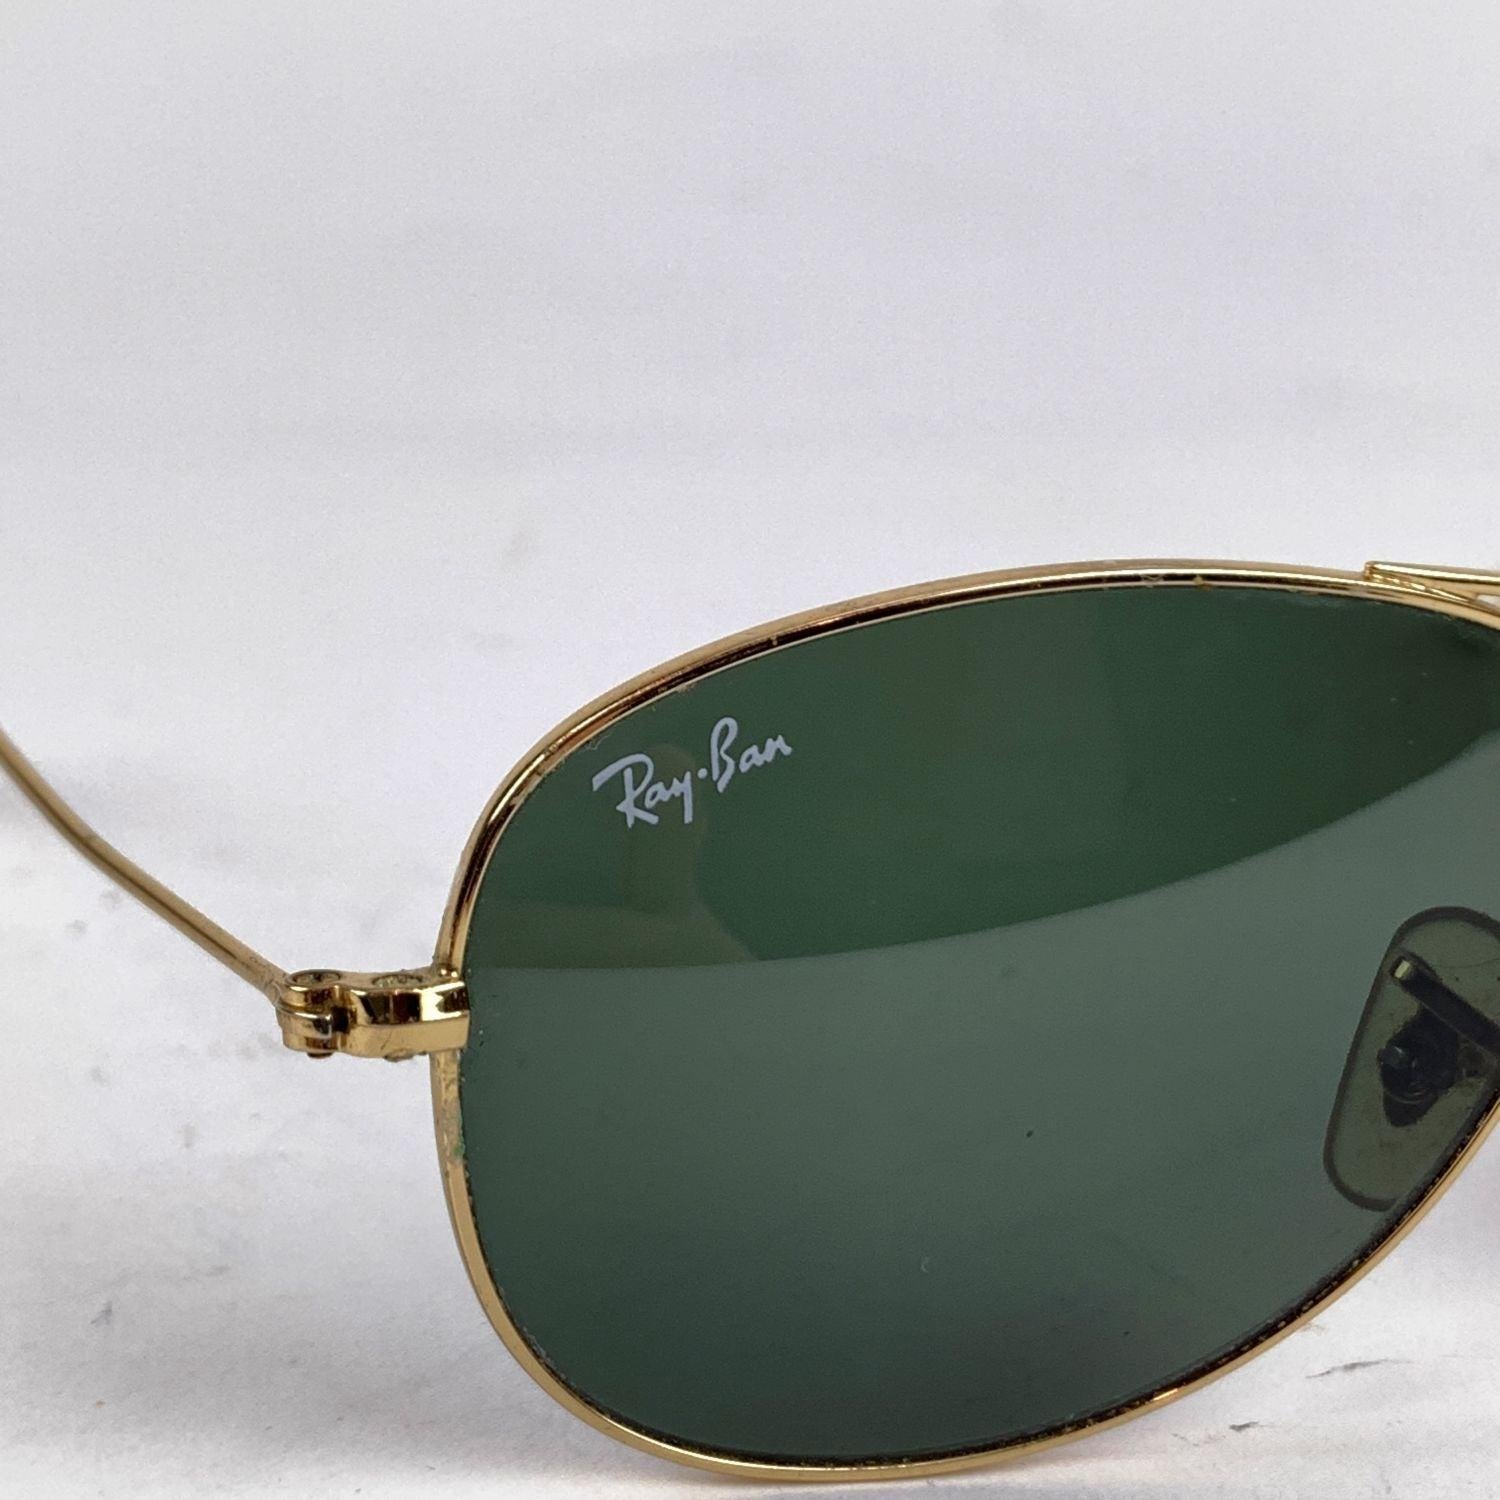 Vintage Ray Ban RB 3362 'Cockpit' sunglasses. Cool variation of traditional aviator glasses . Gold metal frame with original G15 green lenses RB etched on lens. RAY BAN gold logo printed on RIGHT lens. Style & refs: RB 3362 - Cockpit - 56/18 - 3N